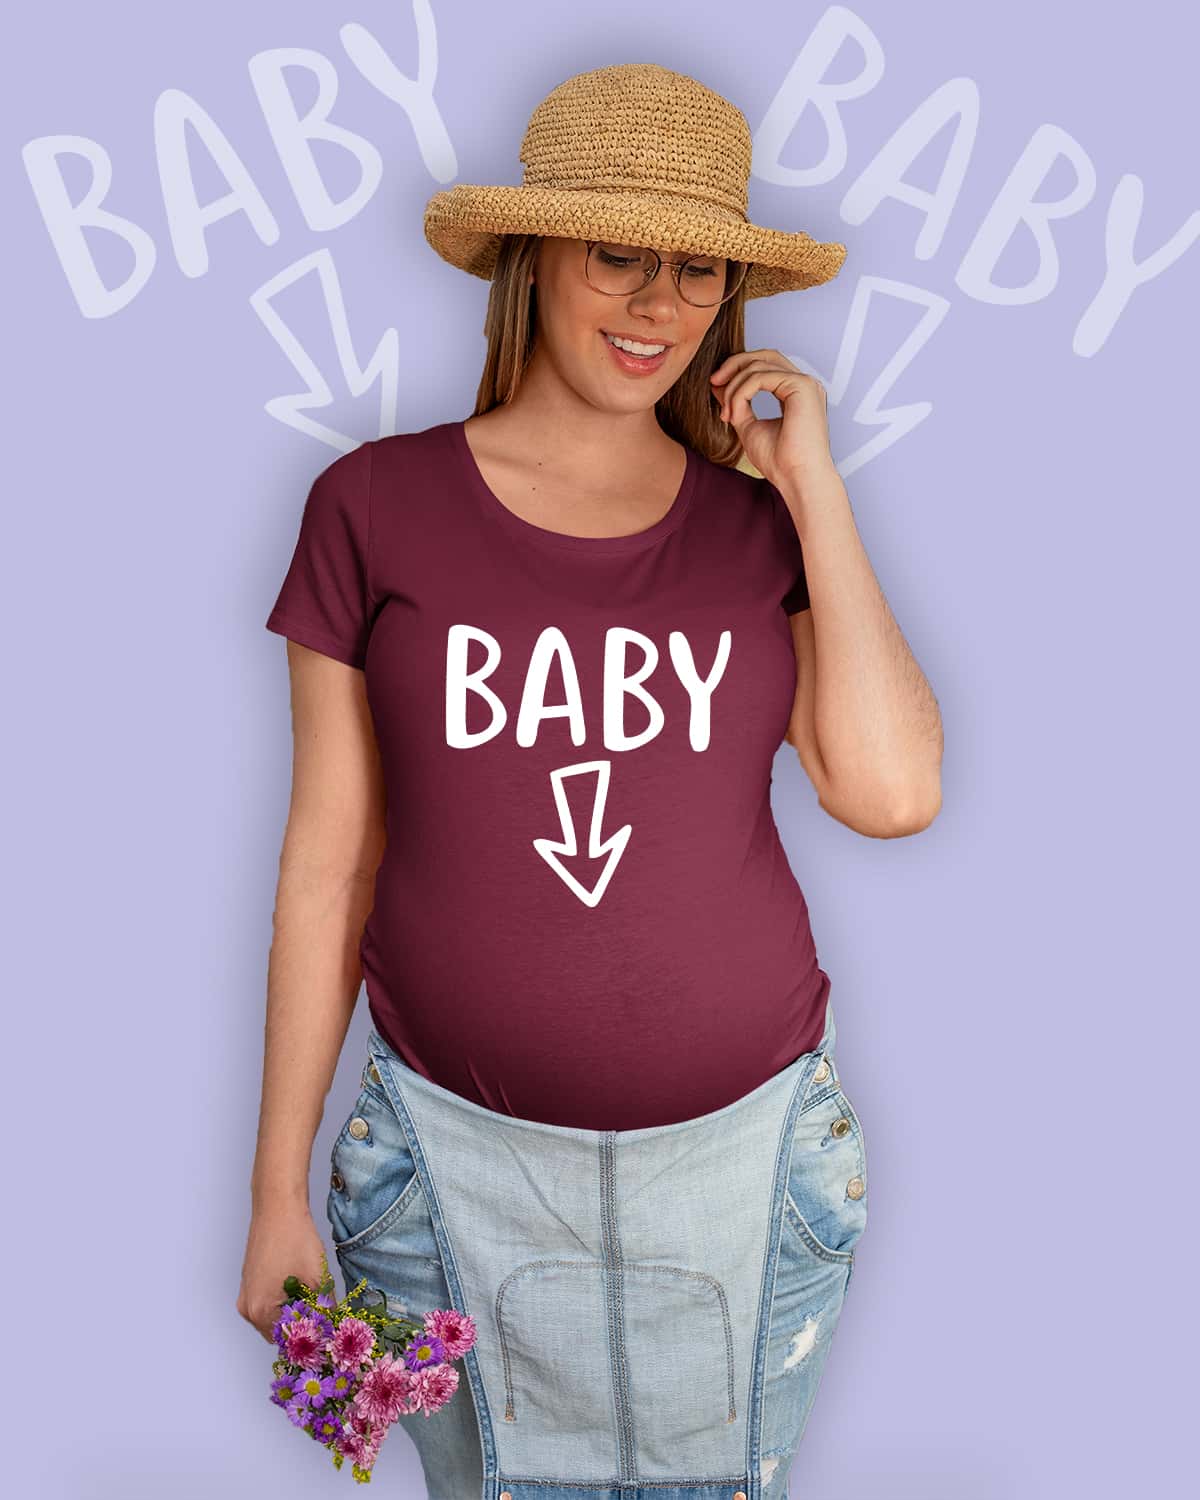 jopo maternity photoshoot ideas poses props indian pregnancy announcement quotes Baby Maroon